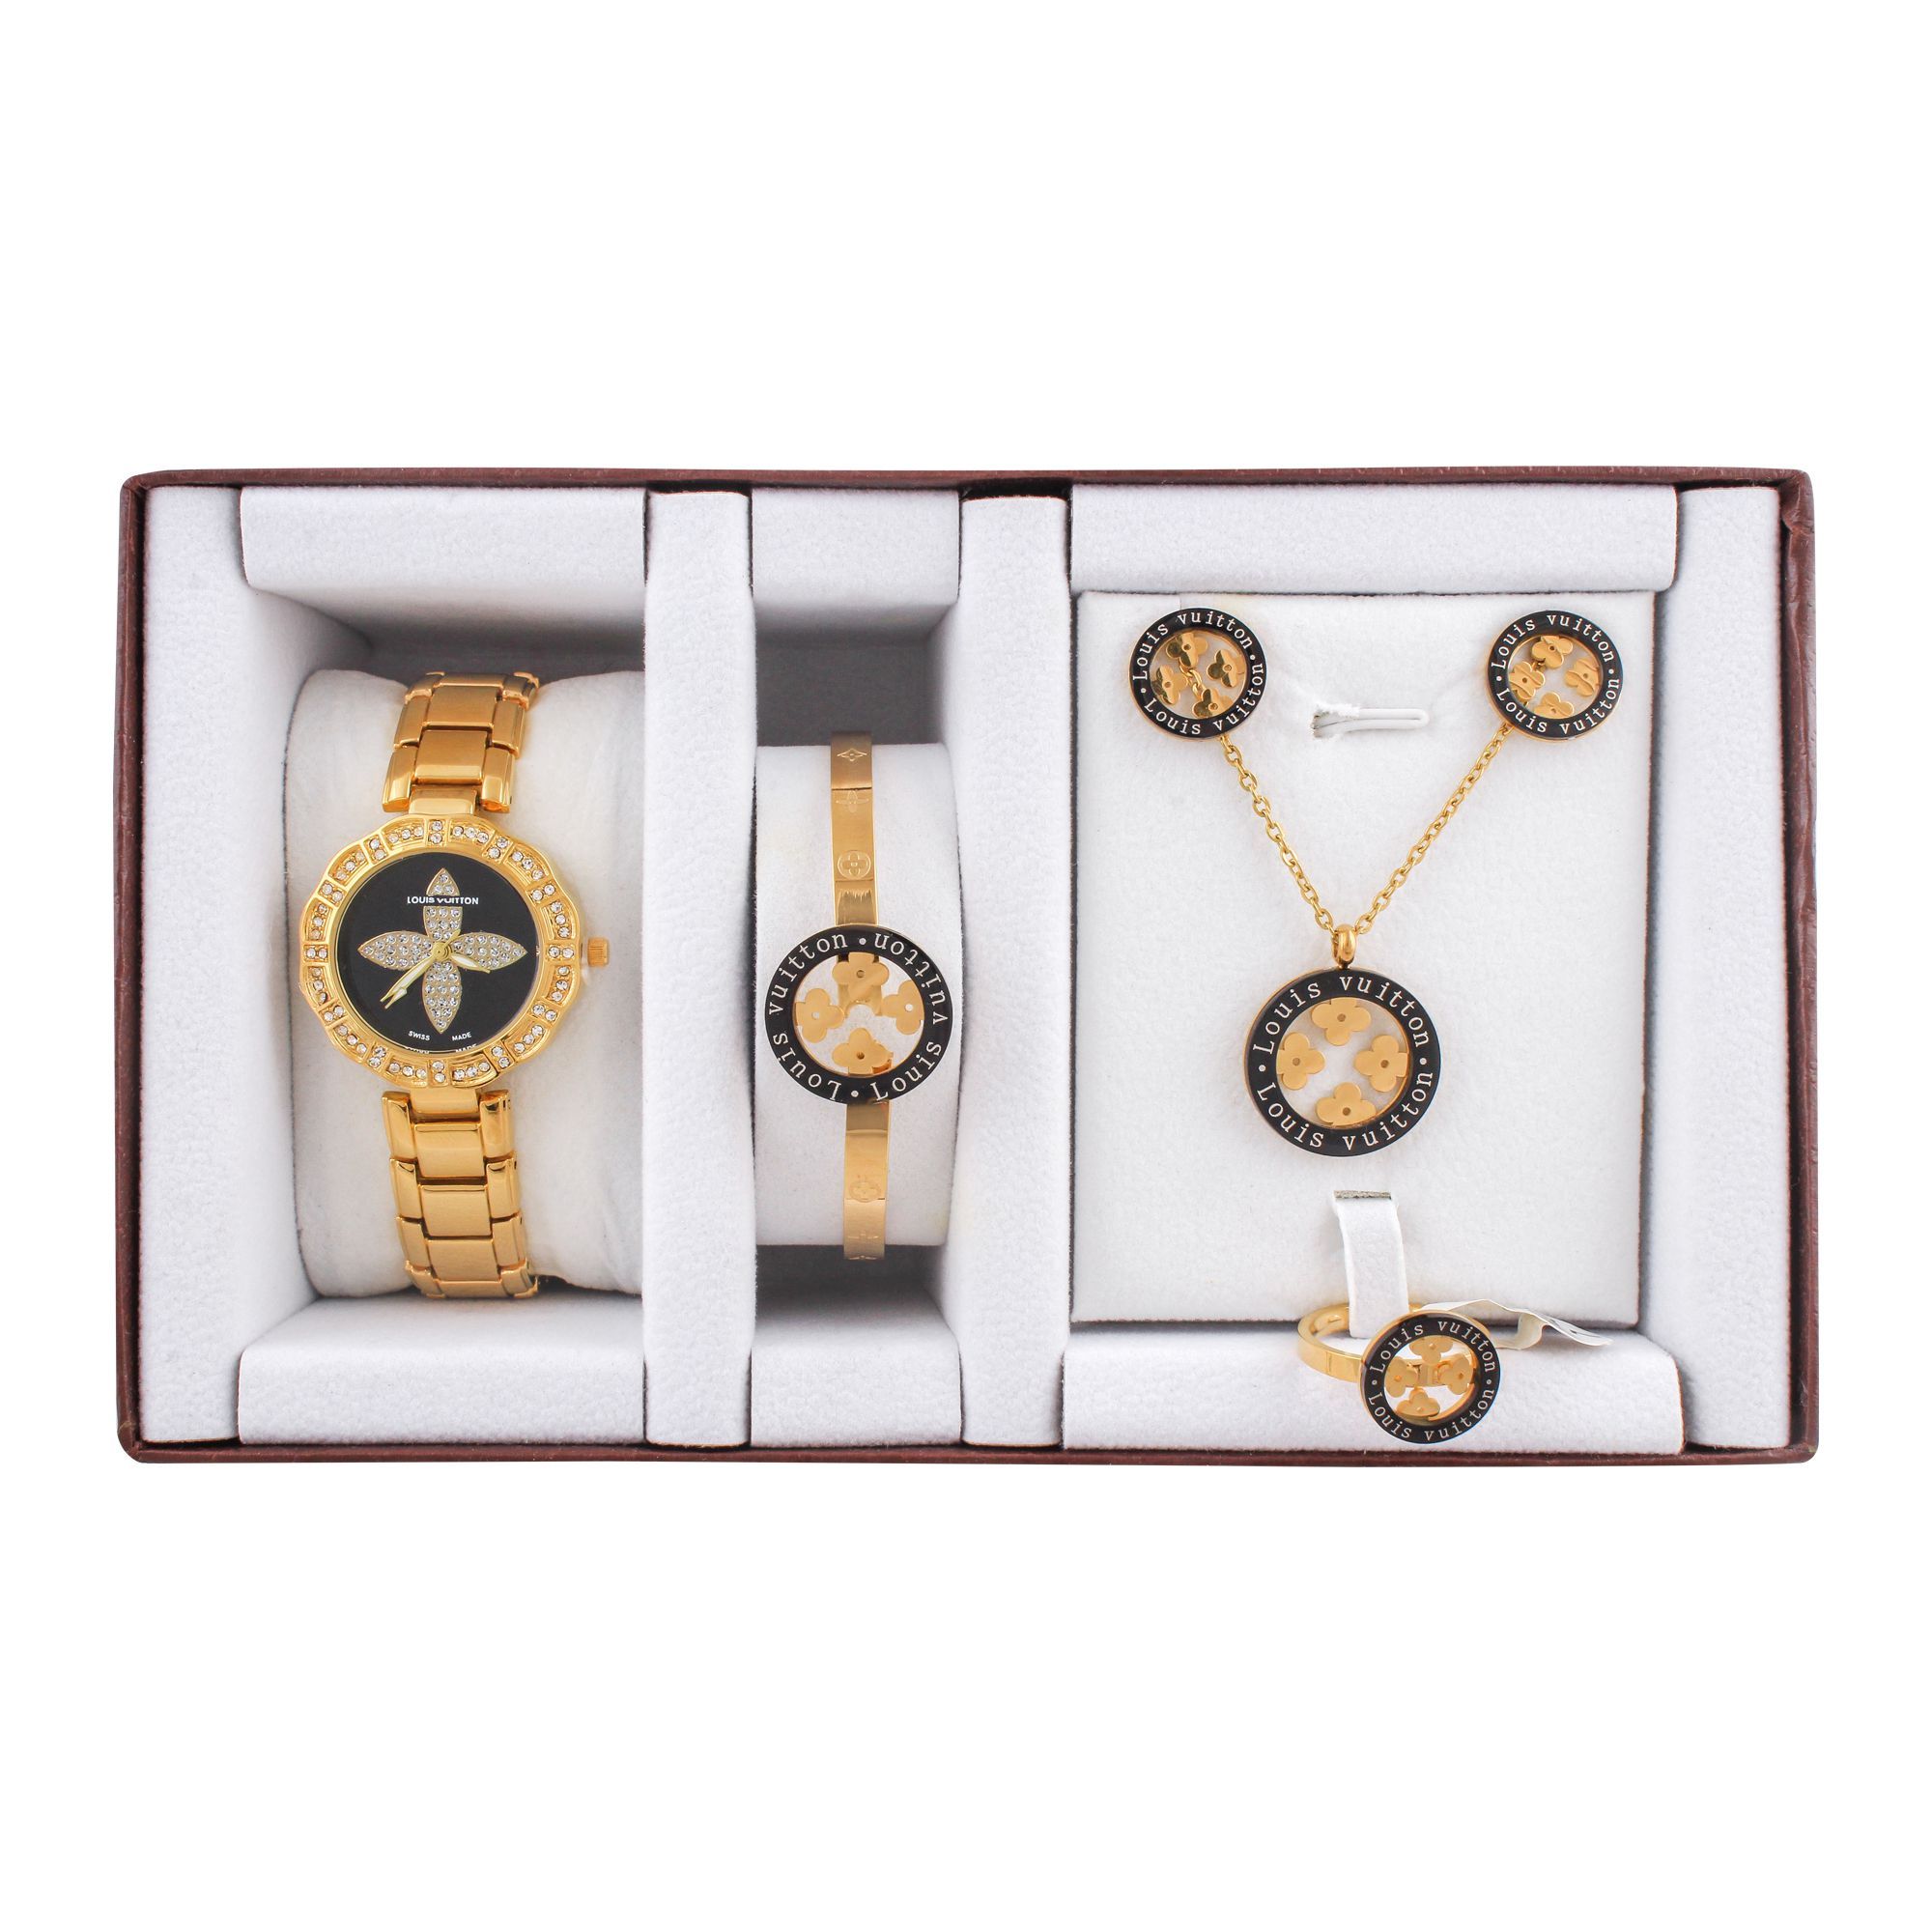 Purchase LV Style Girls Watch & Jewellery Gift Set, NS-0155 Online at Special Price in Pakistan ...